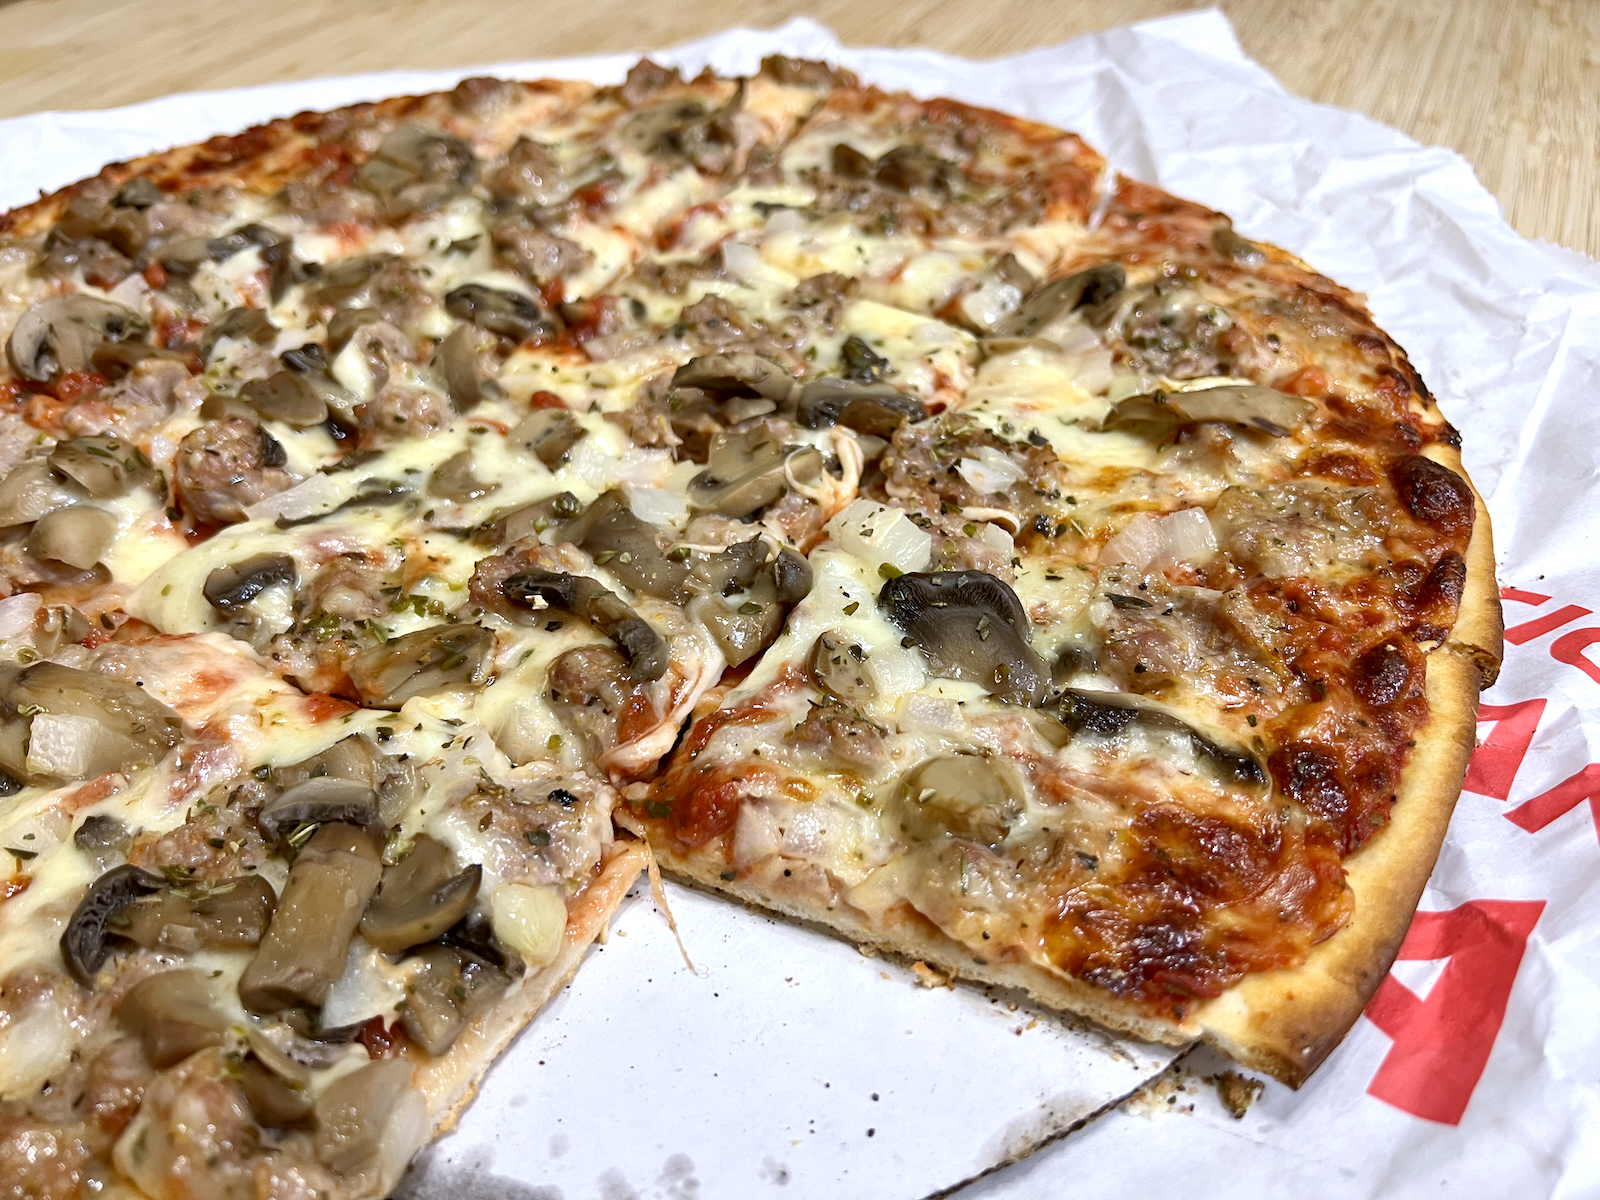 Hup's thin crust pizza